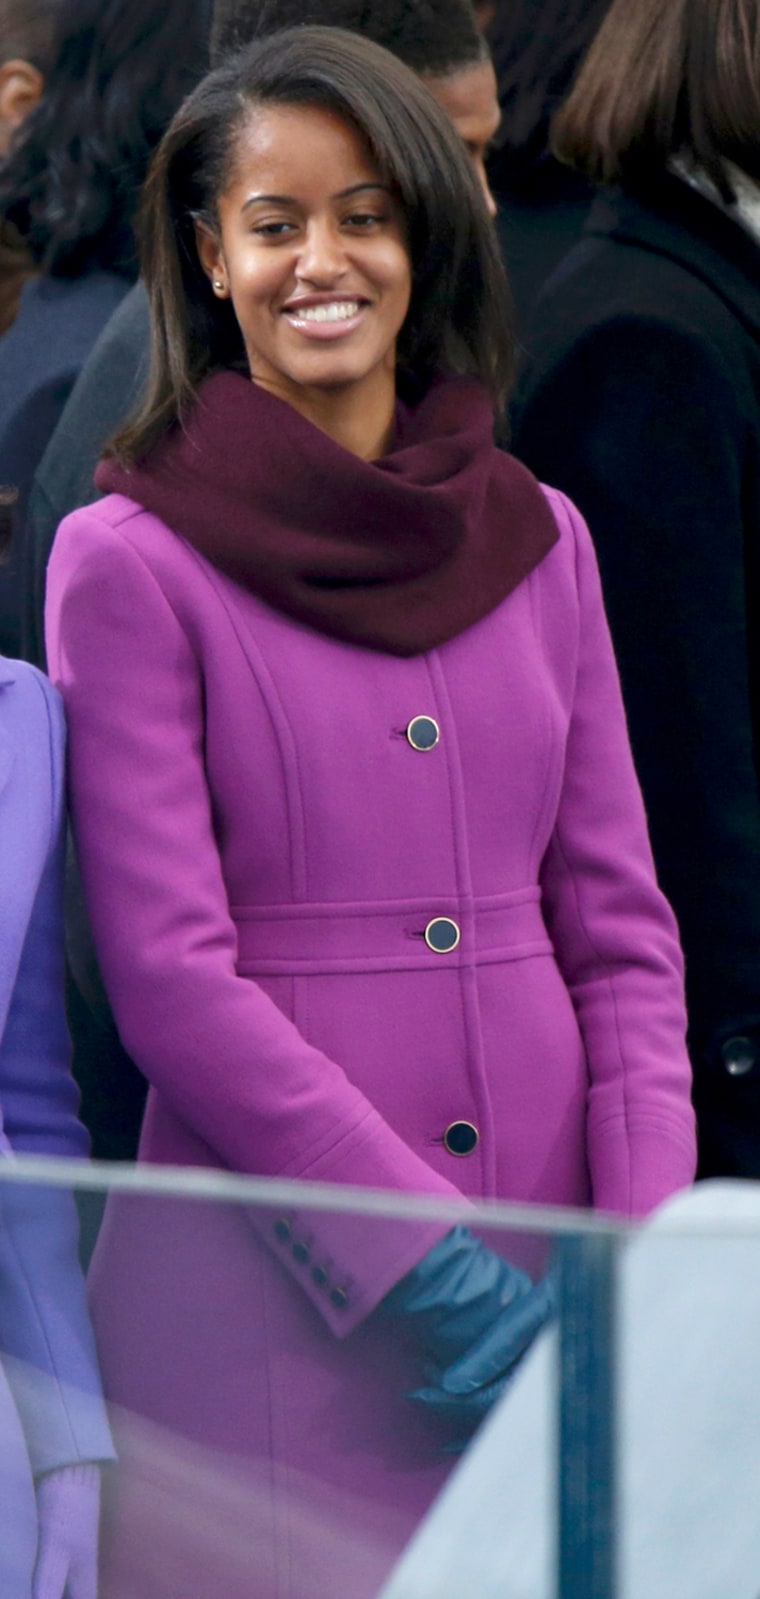 Though J Crew will continue to make Malia's \"Lady Day\" coat, they'll discontinue the color.